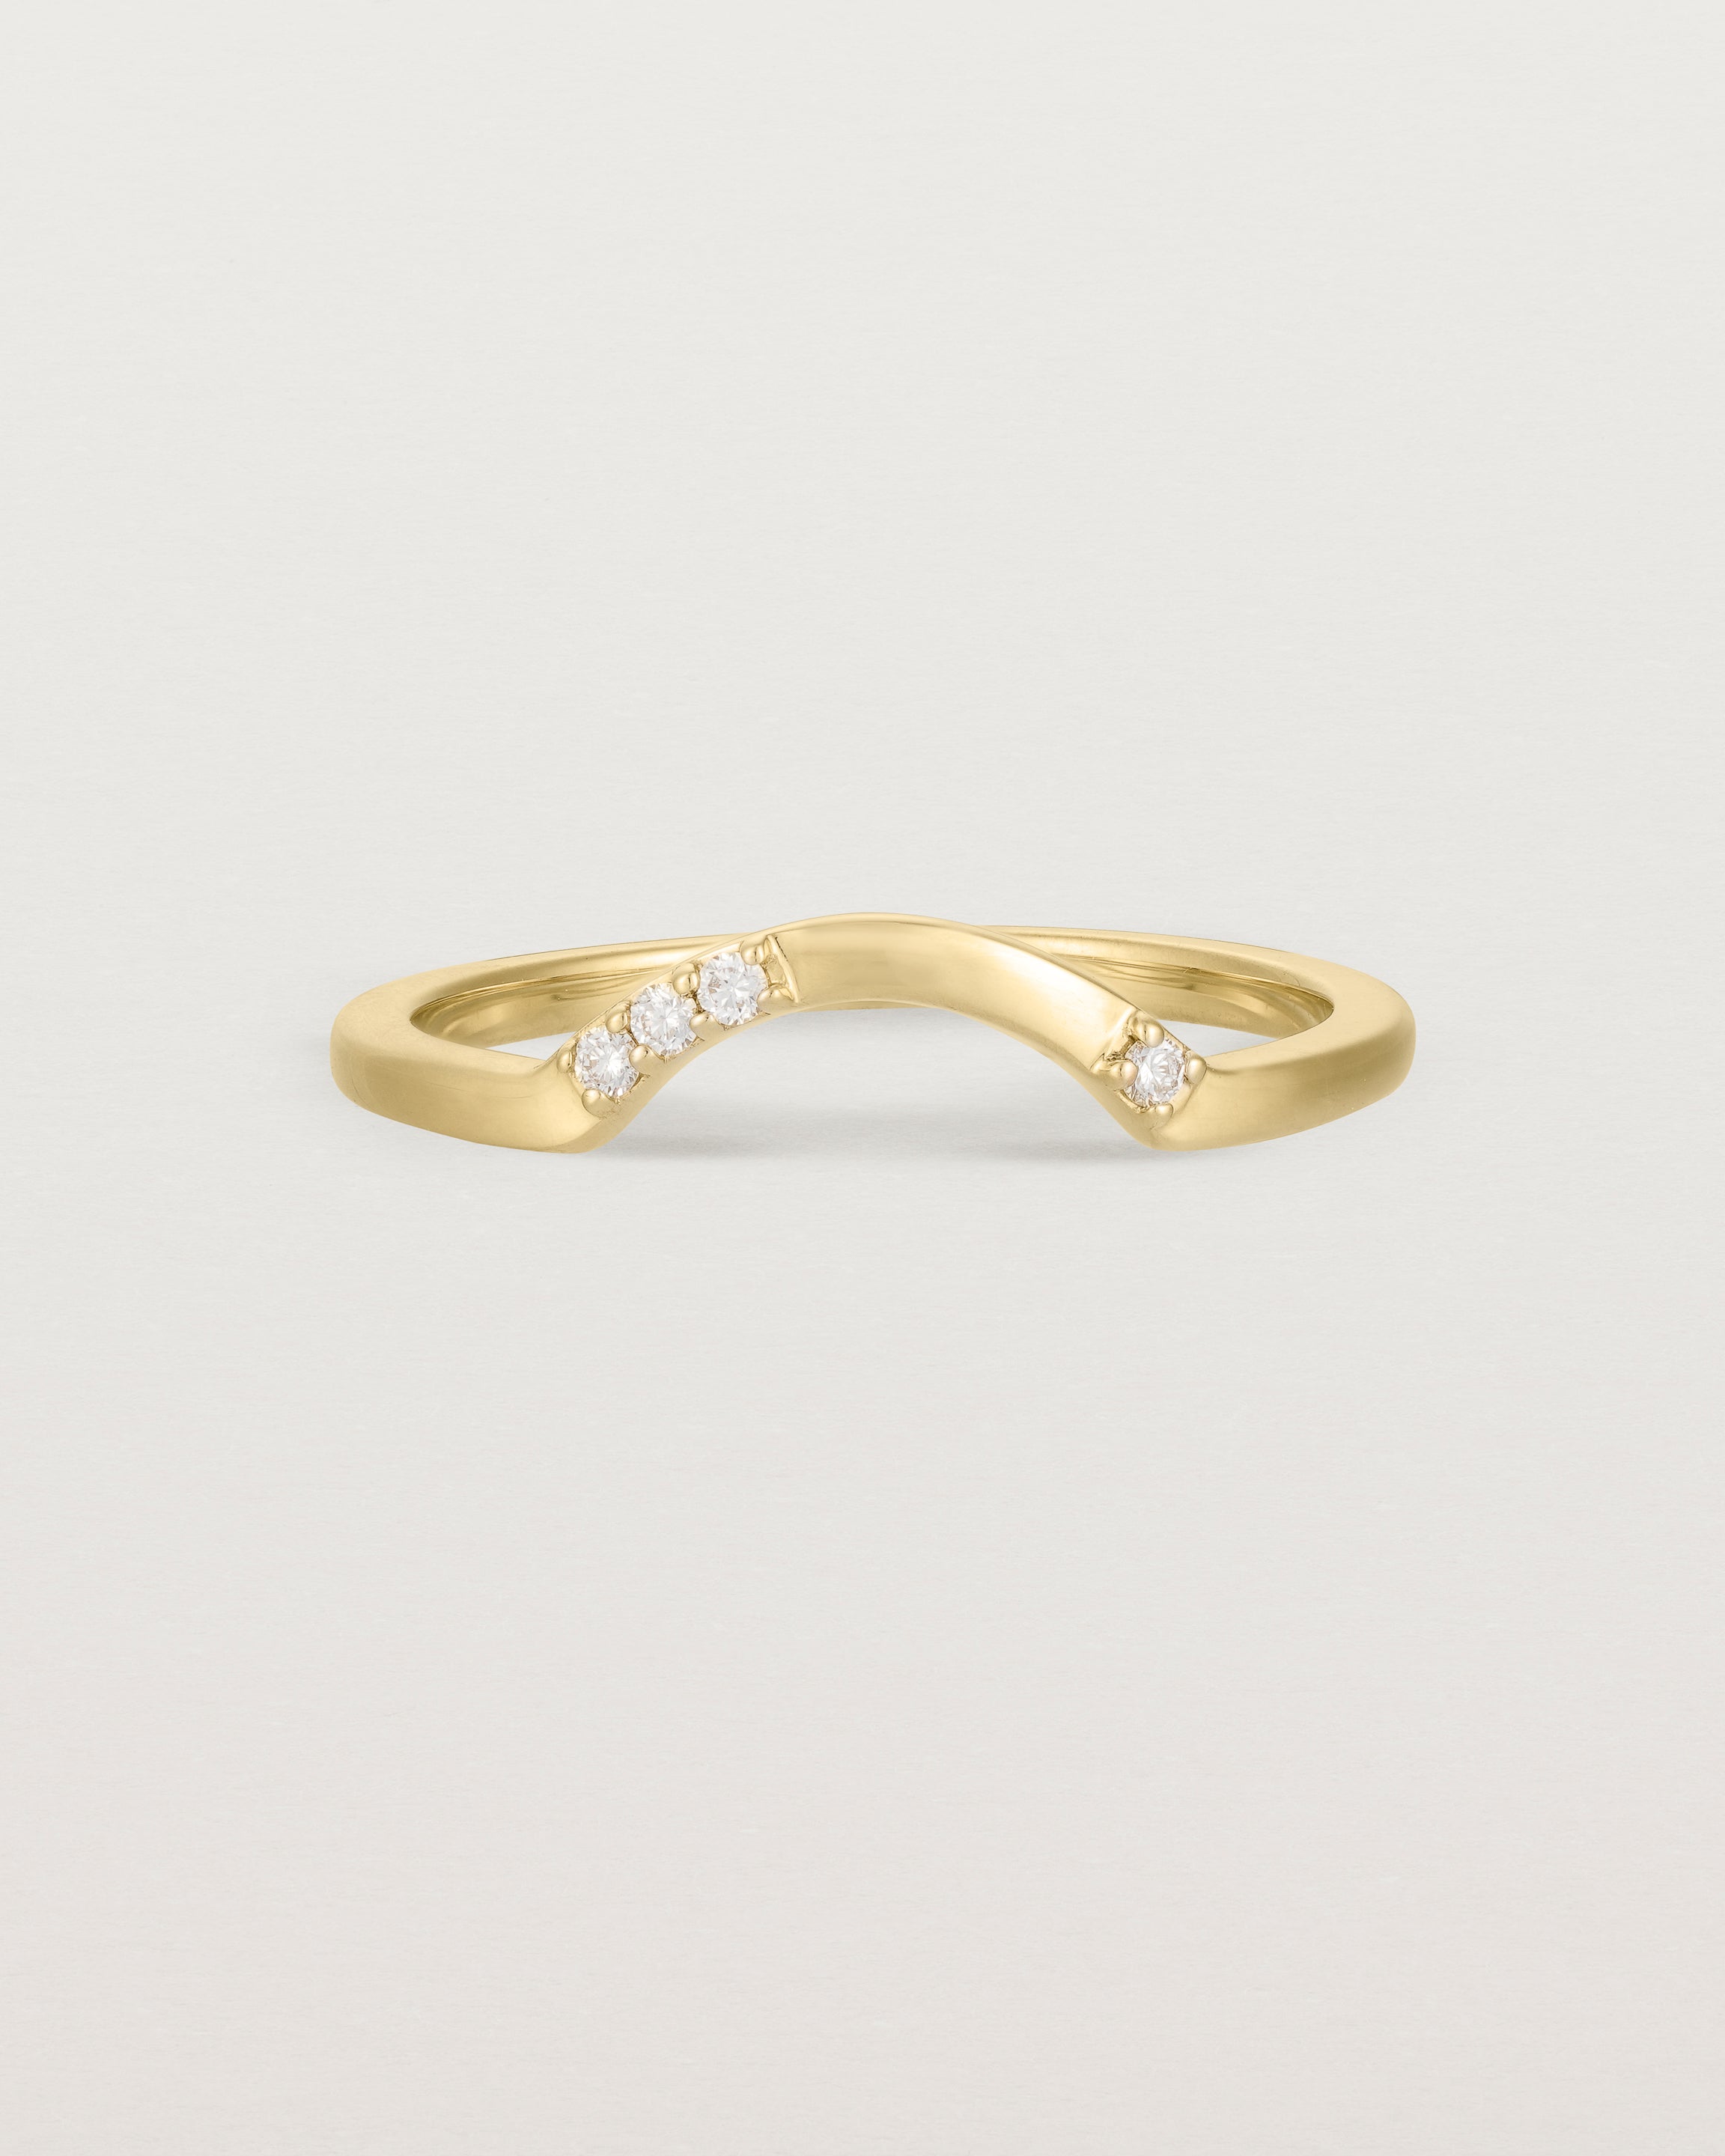 Fit three of a classic arc crown ring featuring scattered white diamonds, crafted in yellow gold